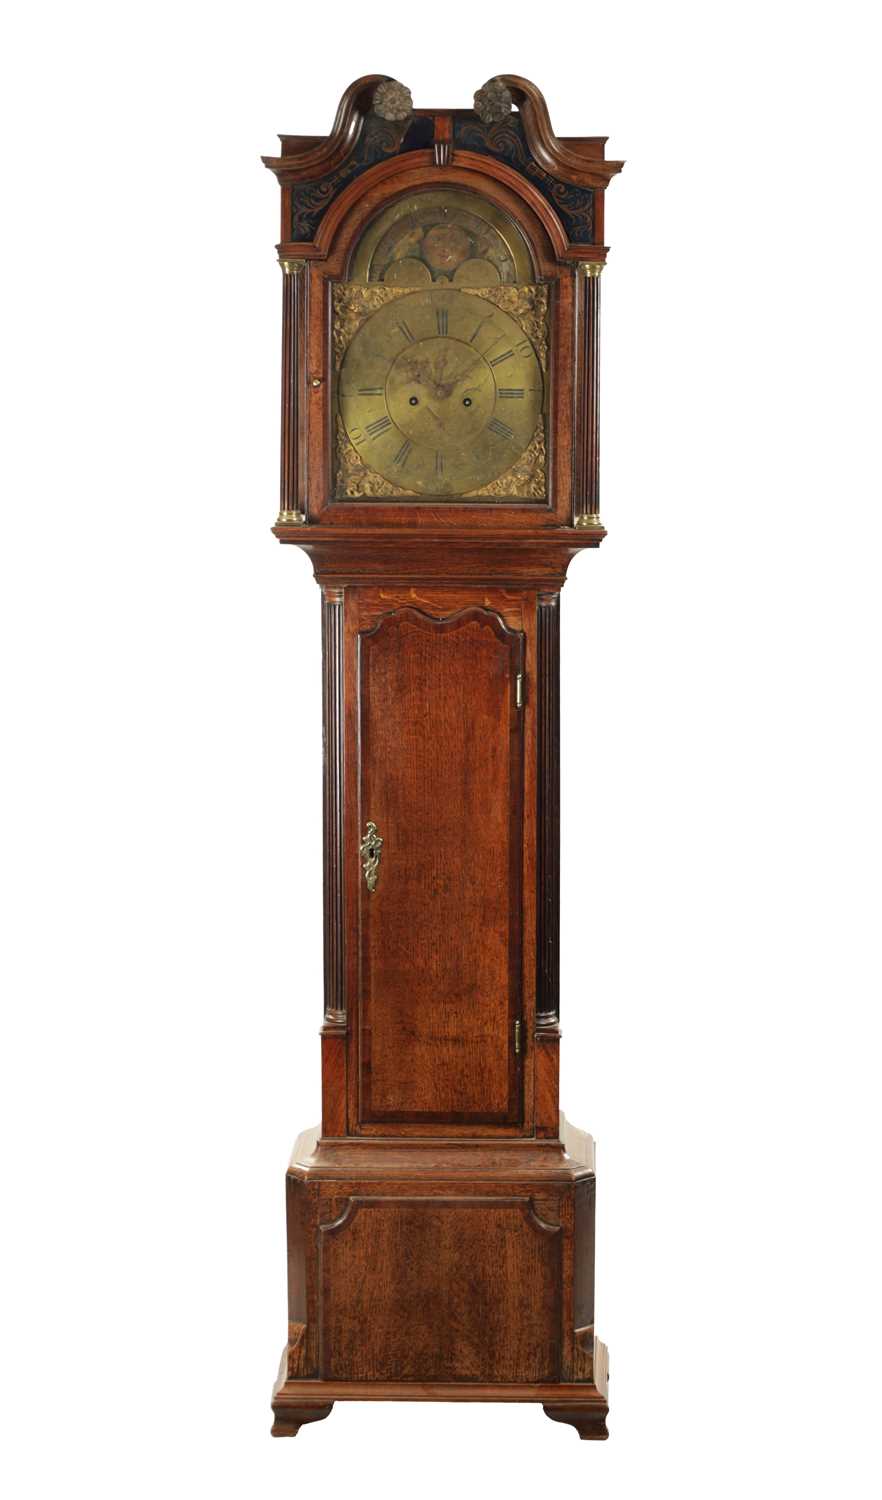 JASON GREEN, NANTWICH. A GEORGE III EIGHT-DAY LONGCASE CLOCK OF SMALL PROPORTIONS